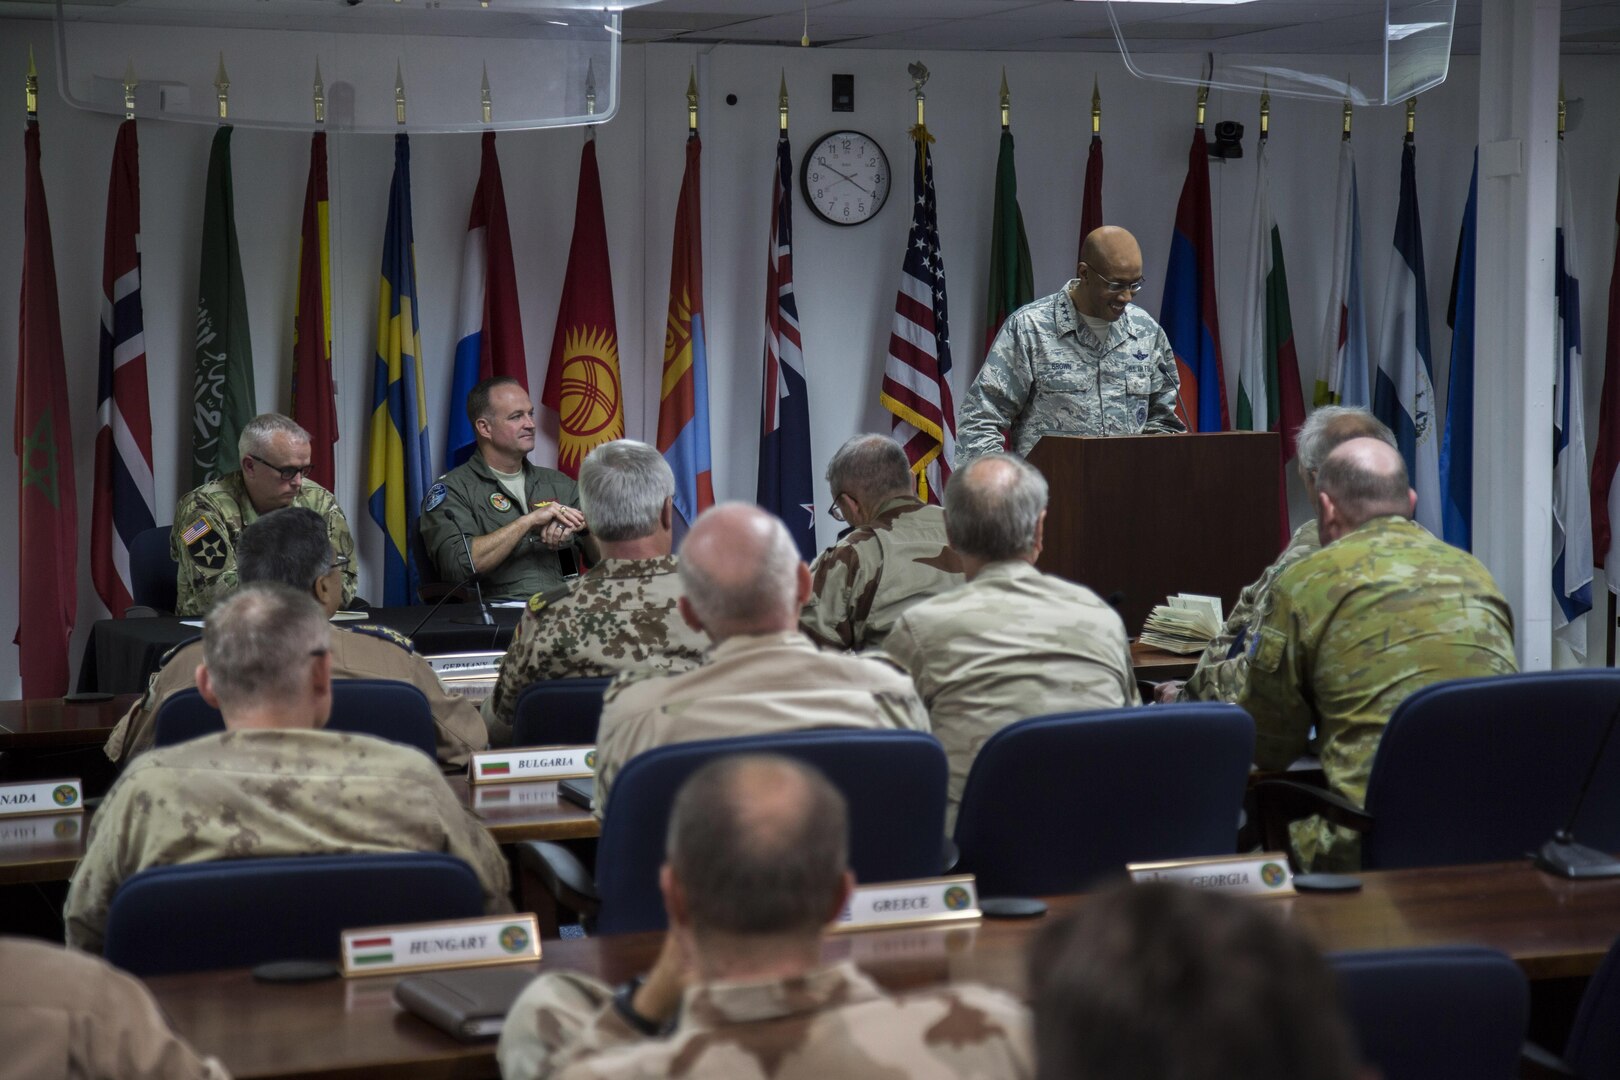 (June 9, 2017) - U.S. Air Force Lt Gen. Charles Q. Brown Jr., deputy commander U.S. Central Command, addresses coalition representatives at the conclusion of a force generation conference at USCENTCOM headquarters. The conference provided a venue for partner nations to volunteer personnel, equipment, and resources to the Combined Joint Task Force – Operation Inherent Resolve (CJTF-OIR) mission. (Photo by Tom Gagnier)